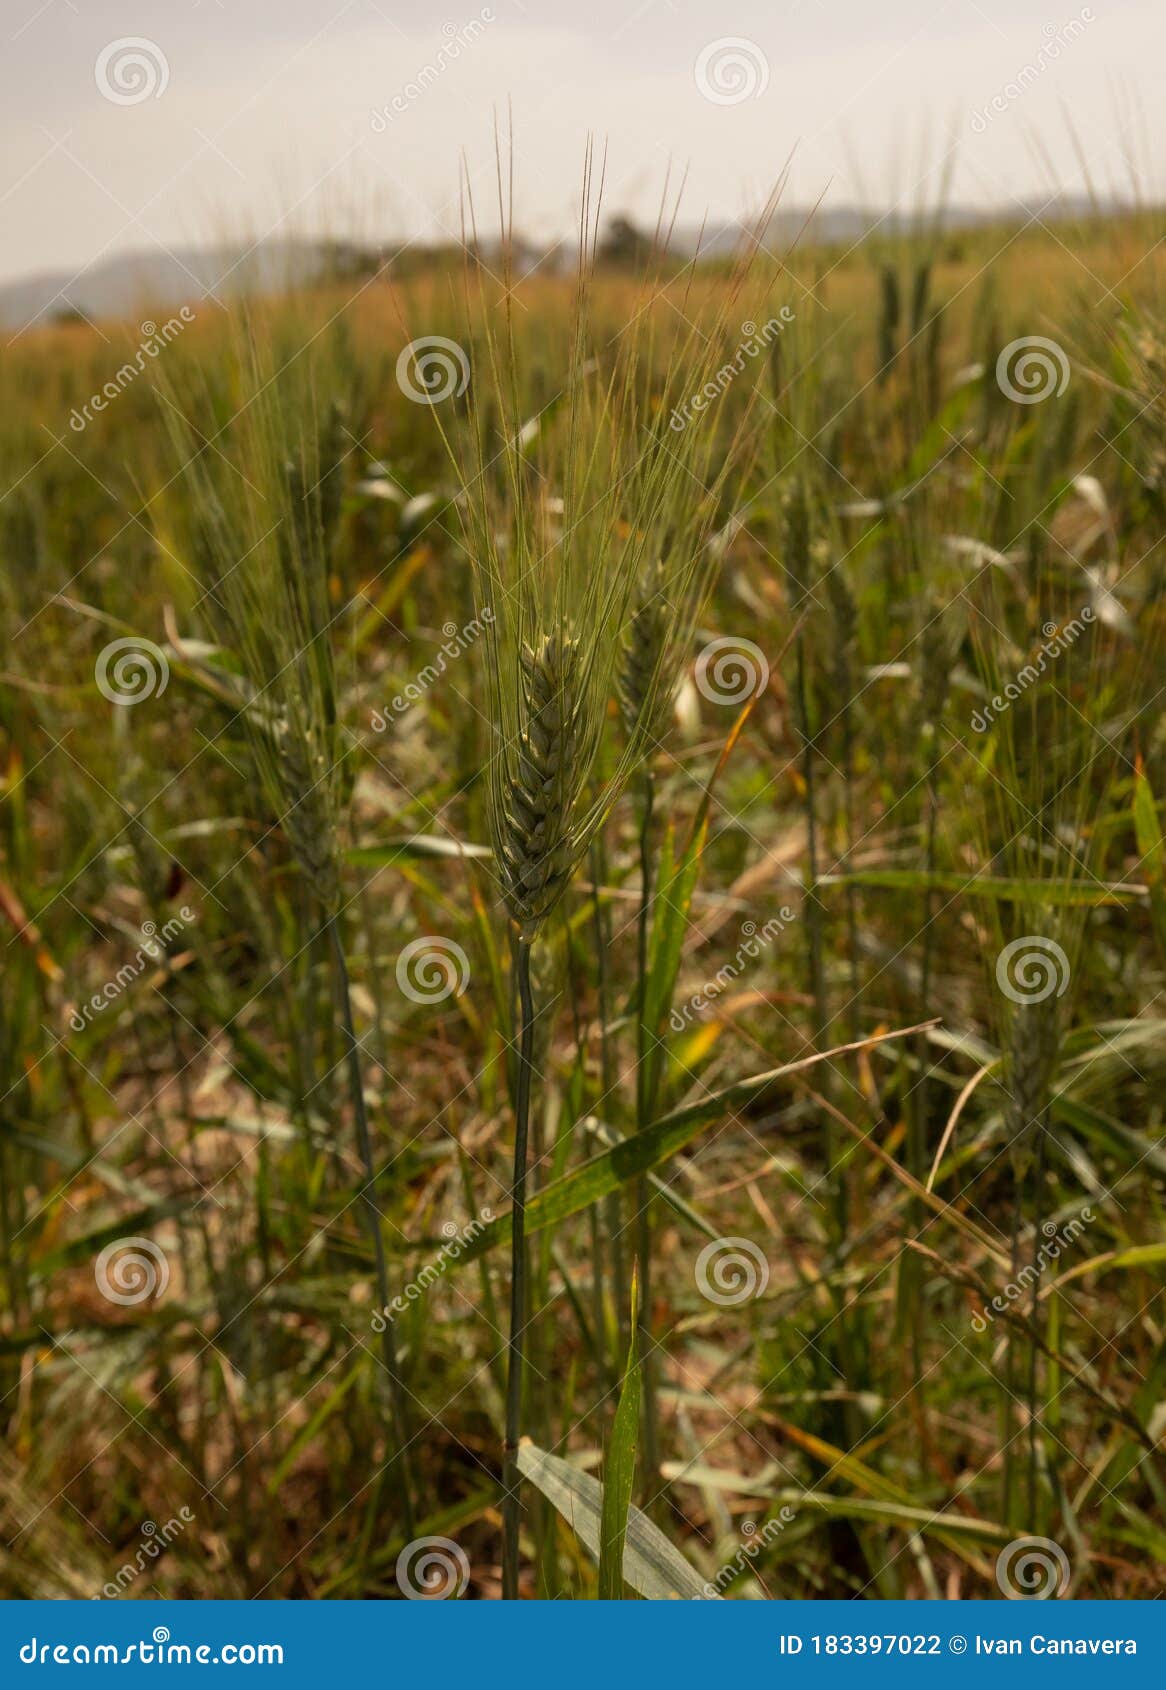 wheat field with flowering spikes ready for harvest